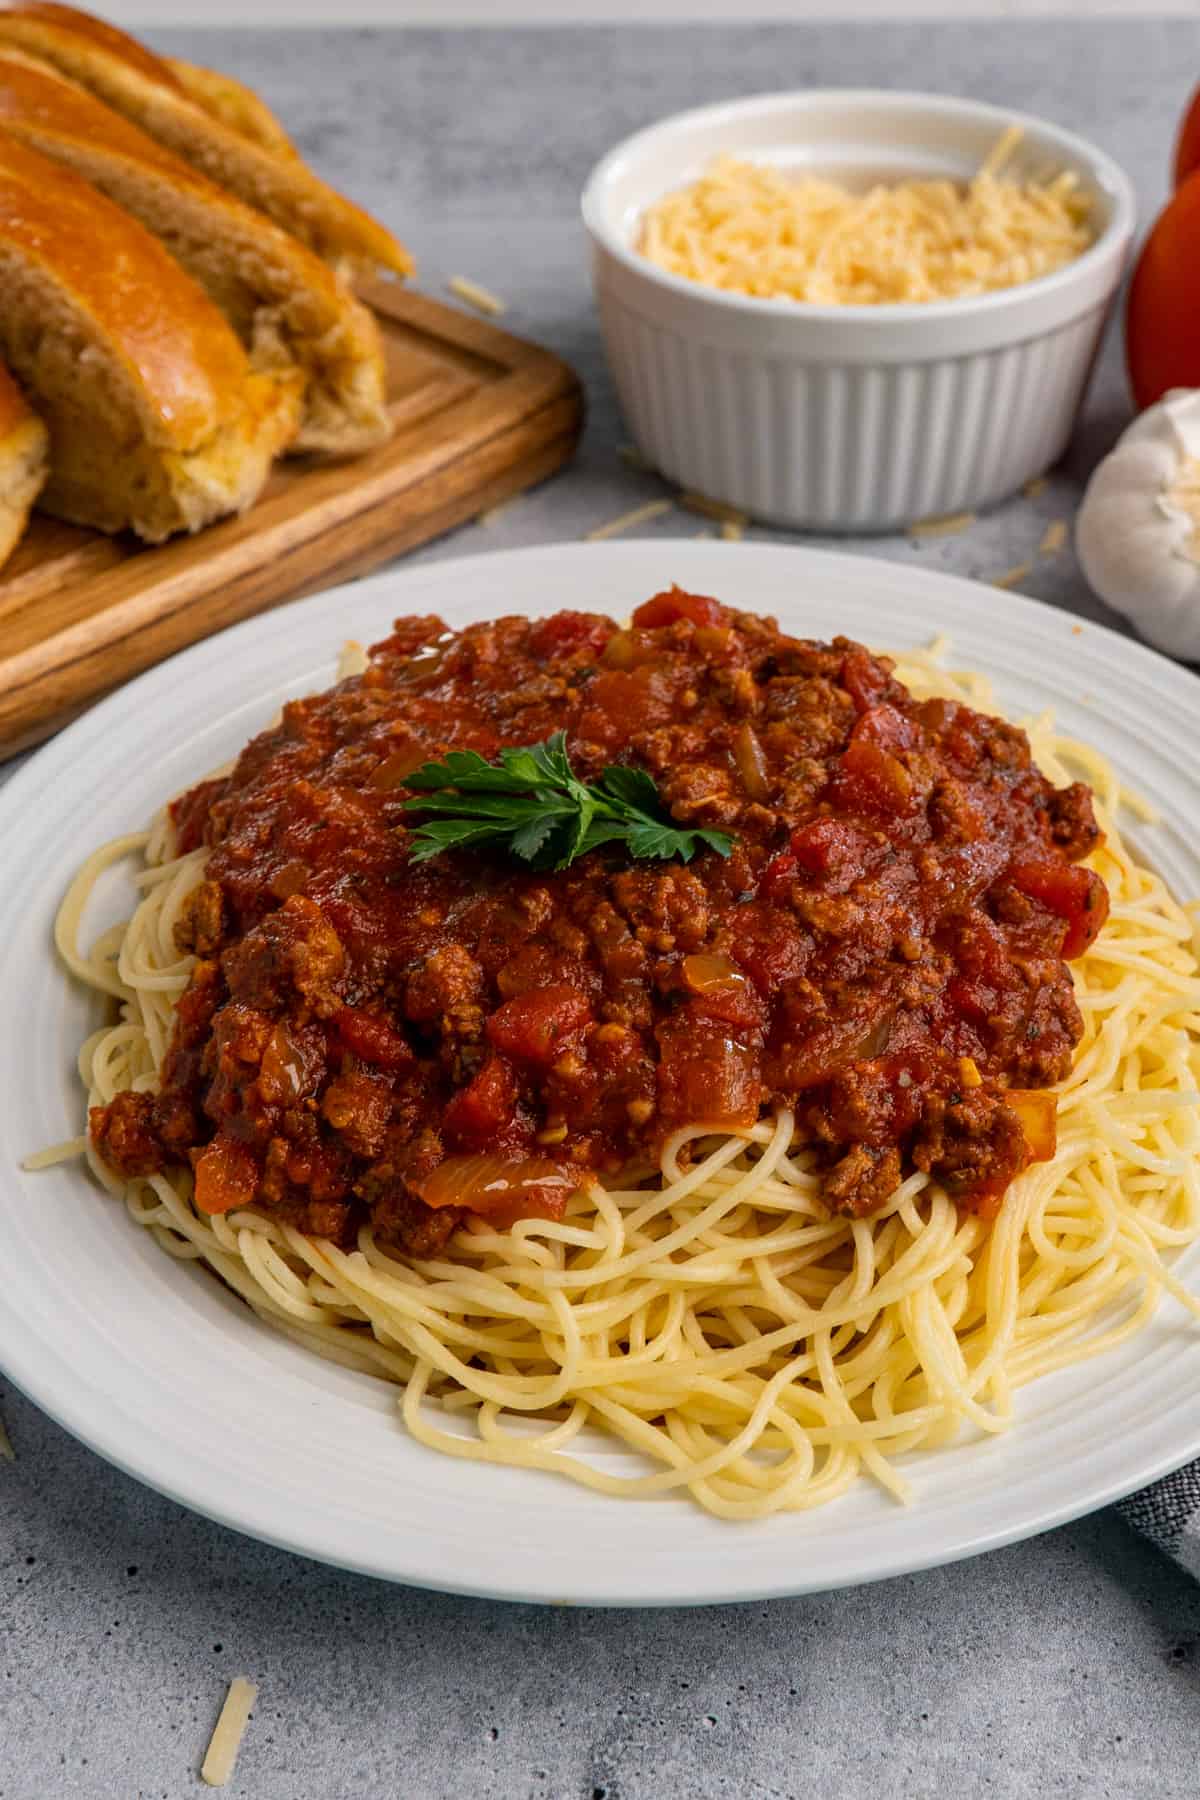 Slow Cooker Spaghetti with Meat Sauce